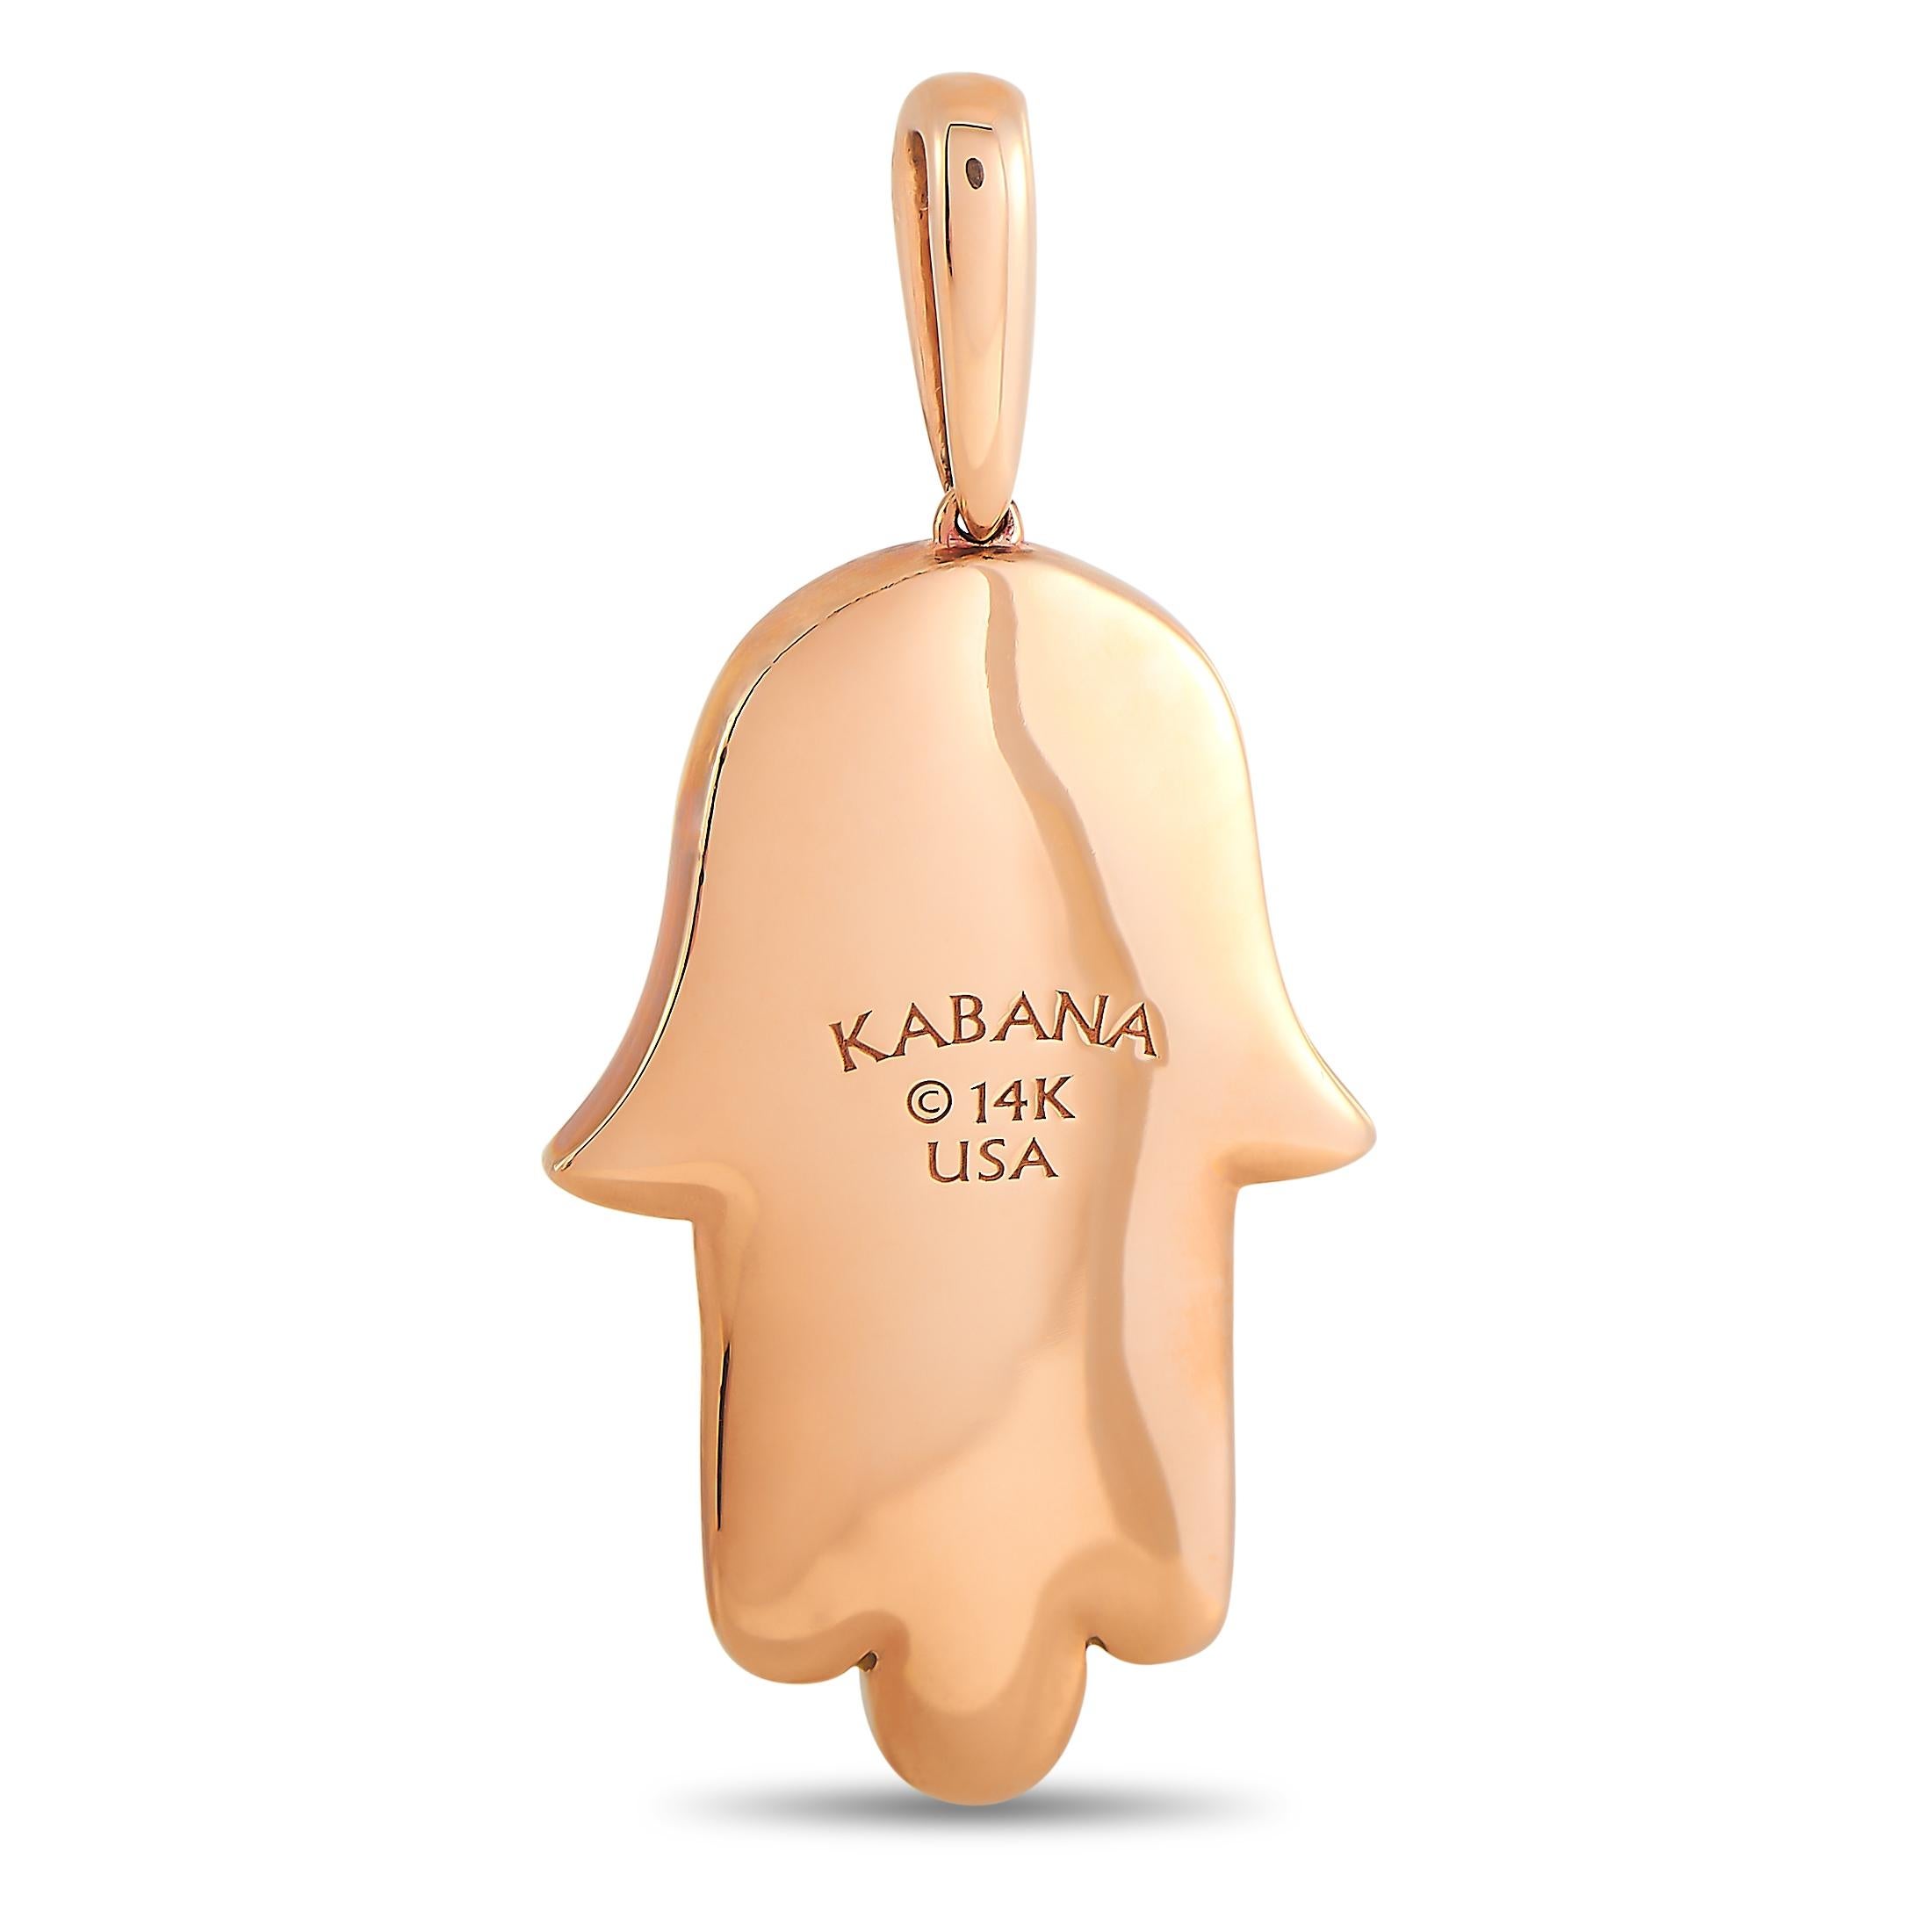 Designed with the unique, eye-catching, and difficult-to-harvest spiny oyster gemstone, this symbolic Hamsa hand pendant is one special piece to include in your collection. The frame is fashioned from 14K rose gold which perfectly complements the